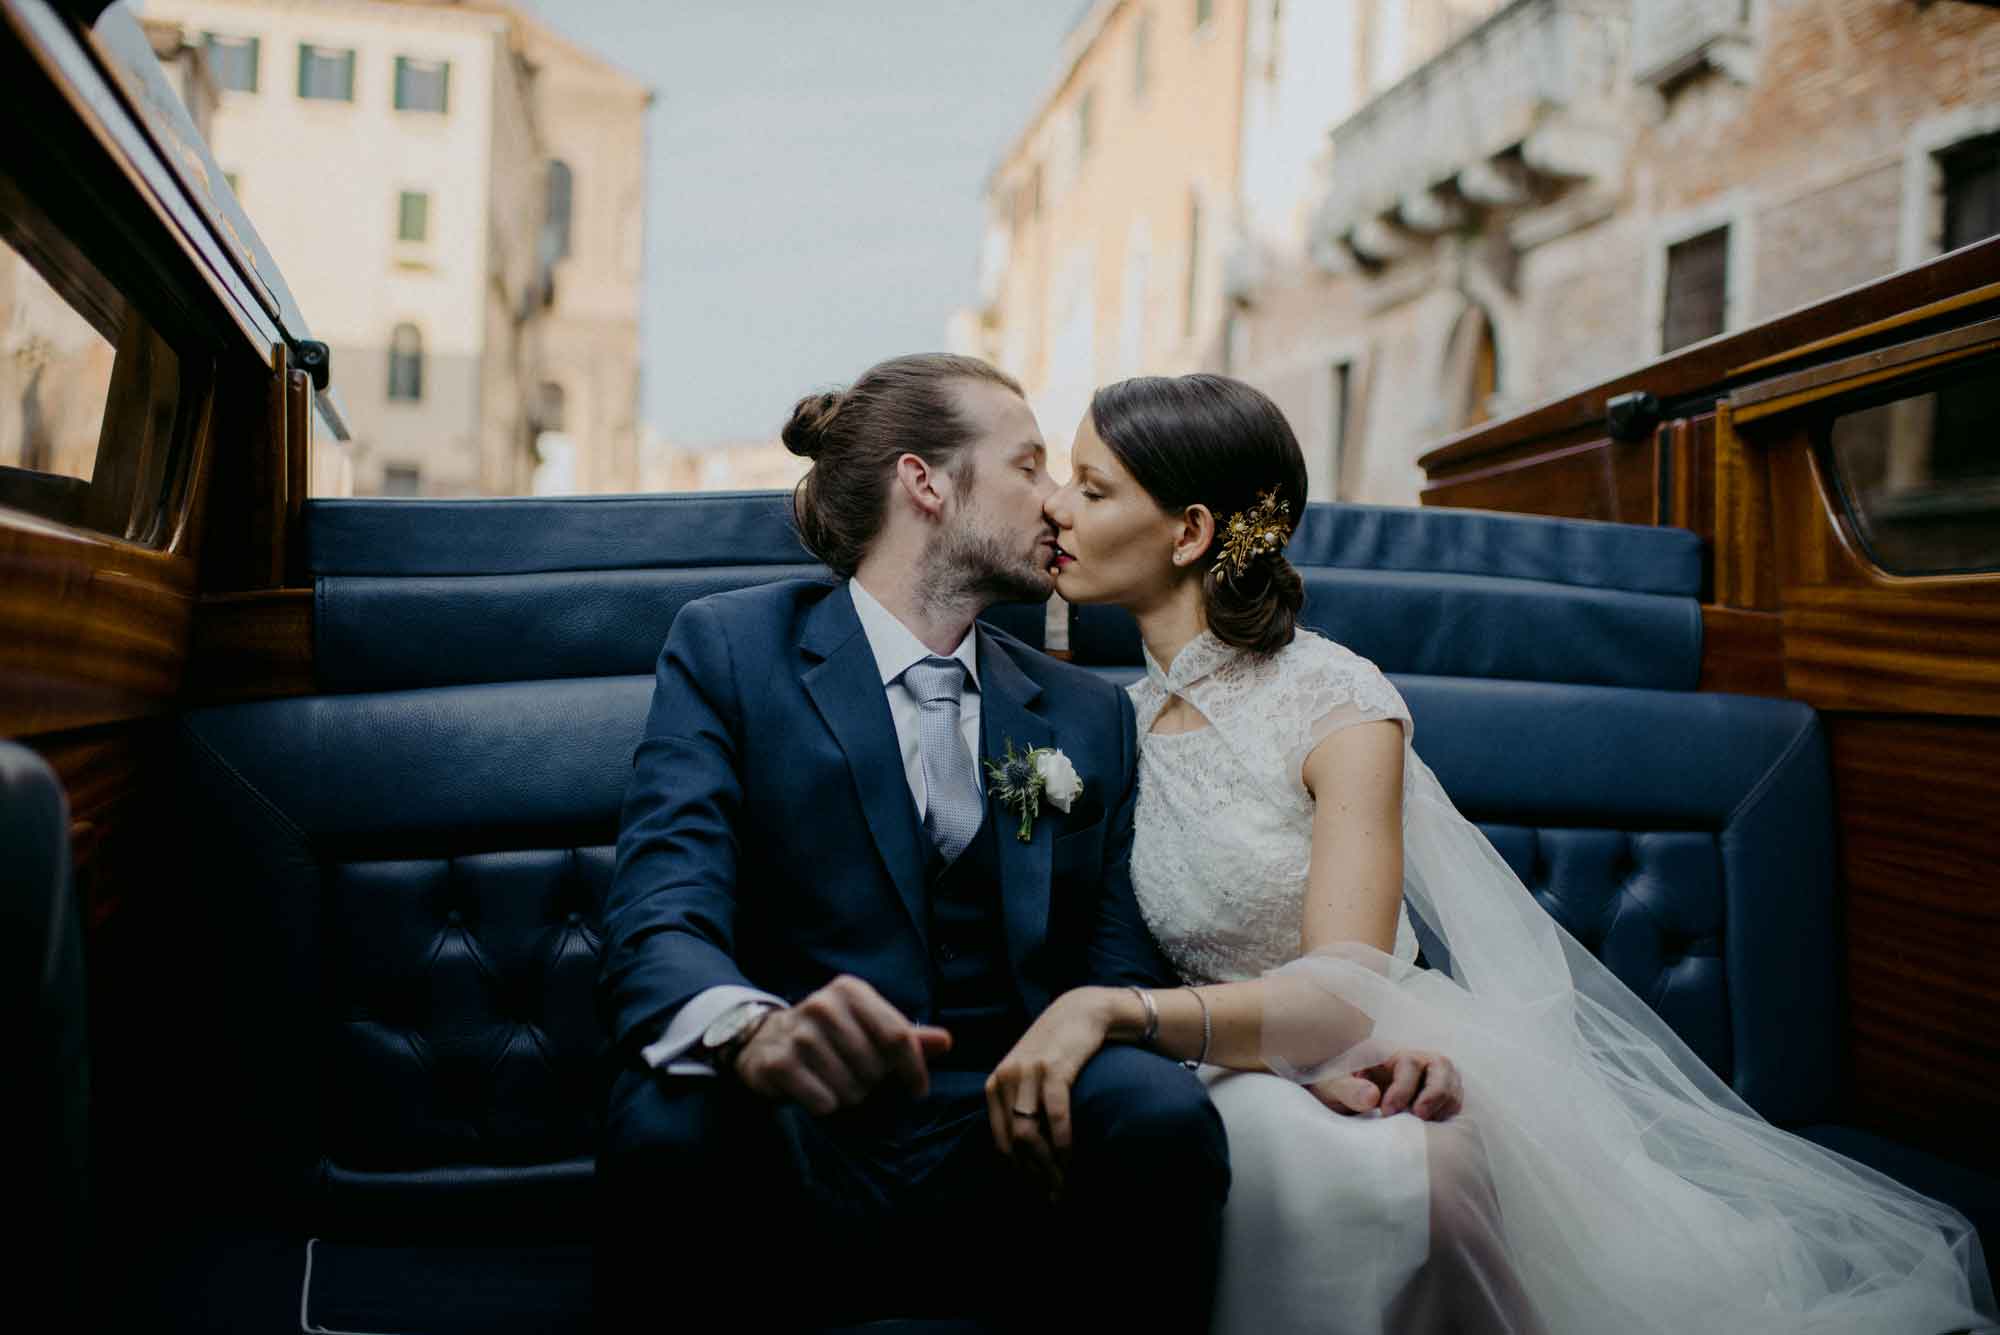 water taxi wedding in venice